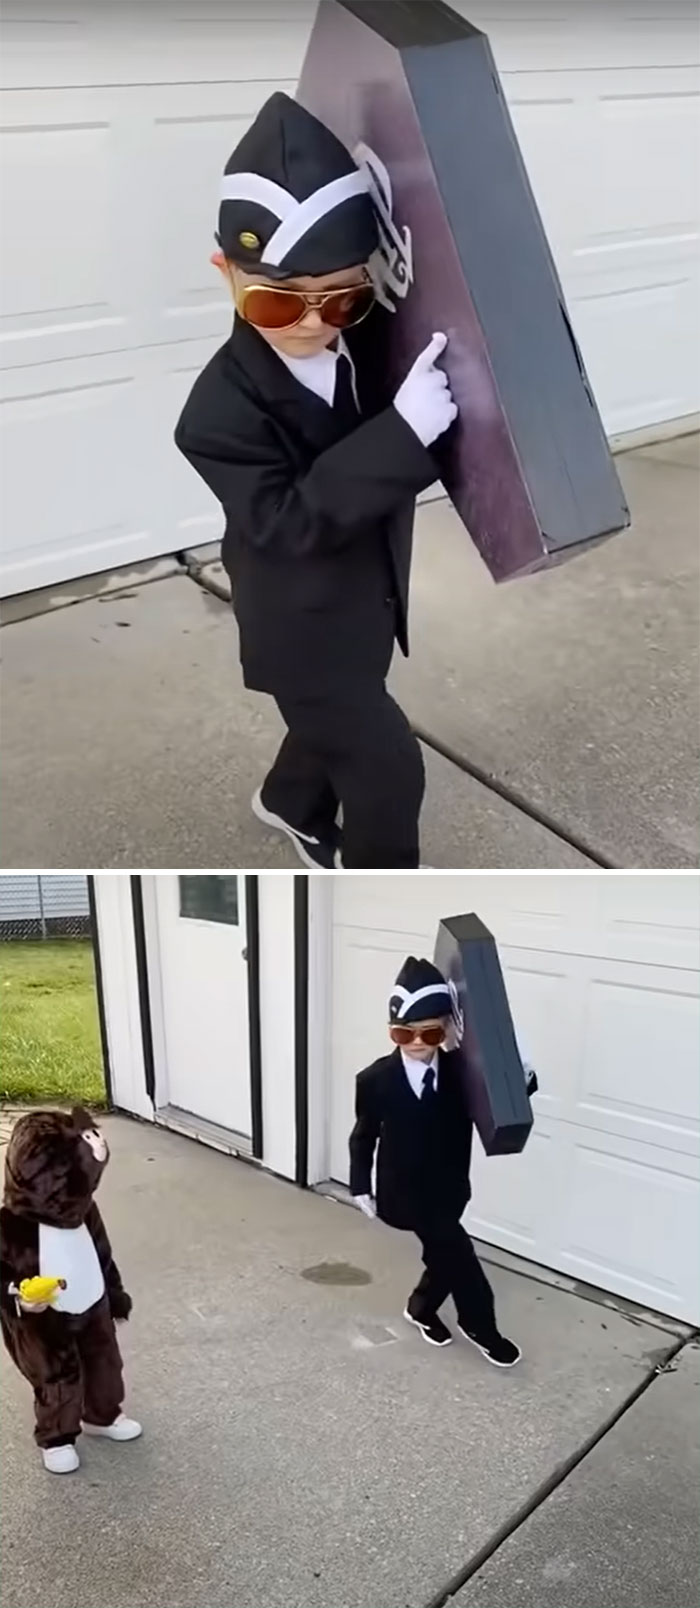 My Son Wanted To Be The “Coffin Dance Guys” For His Halloween Costume